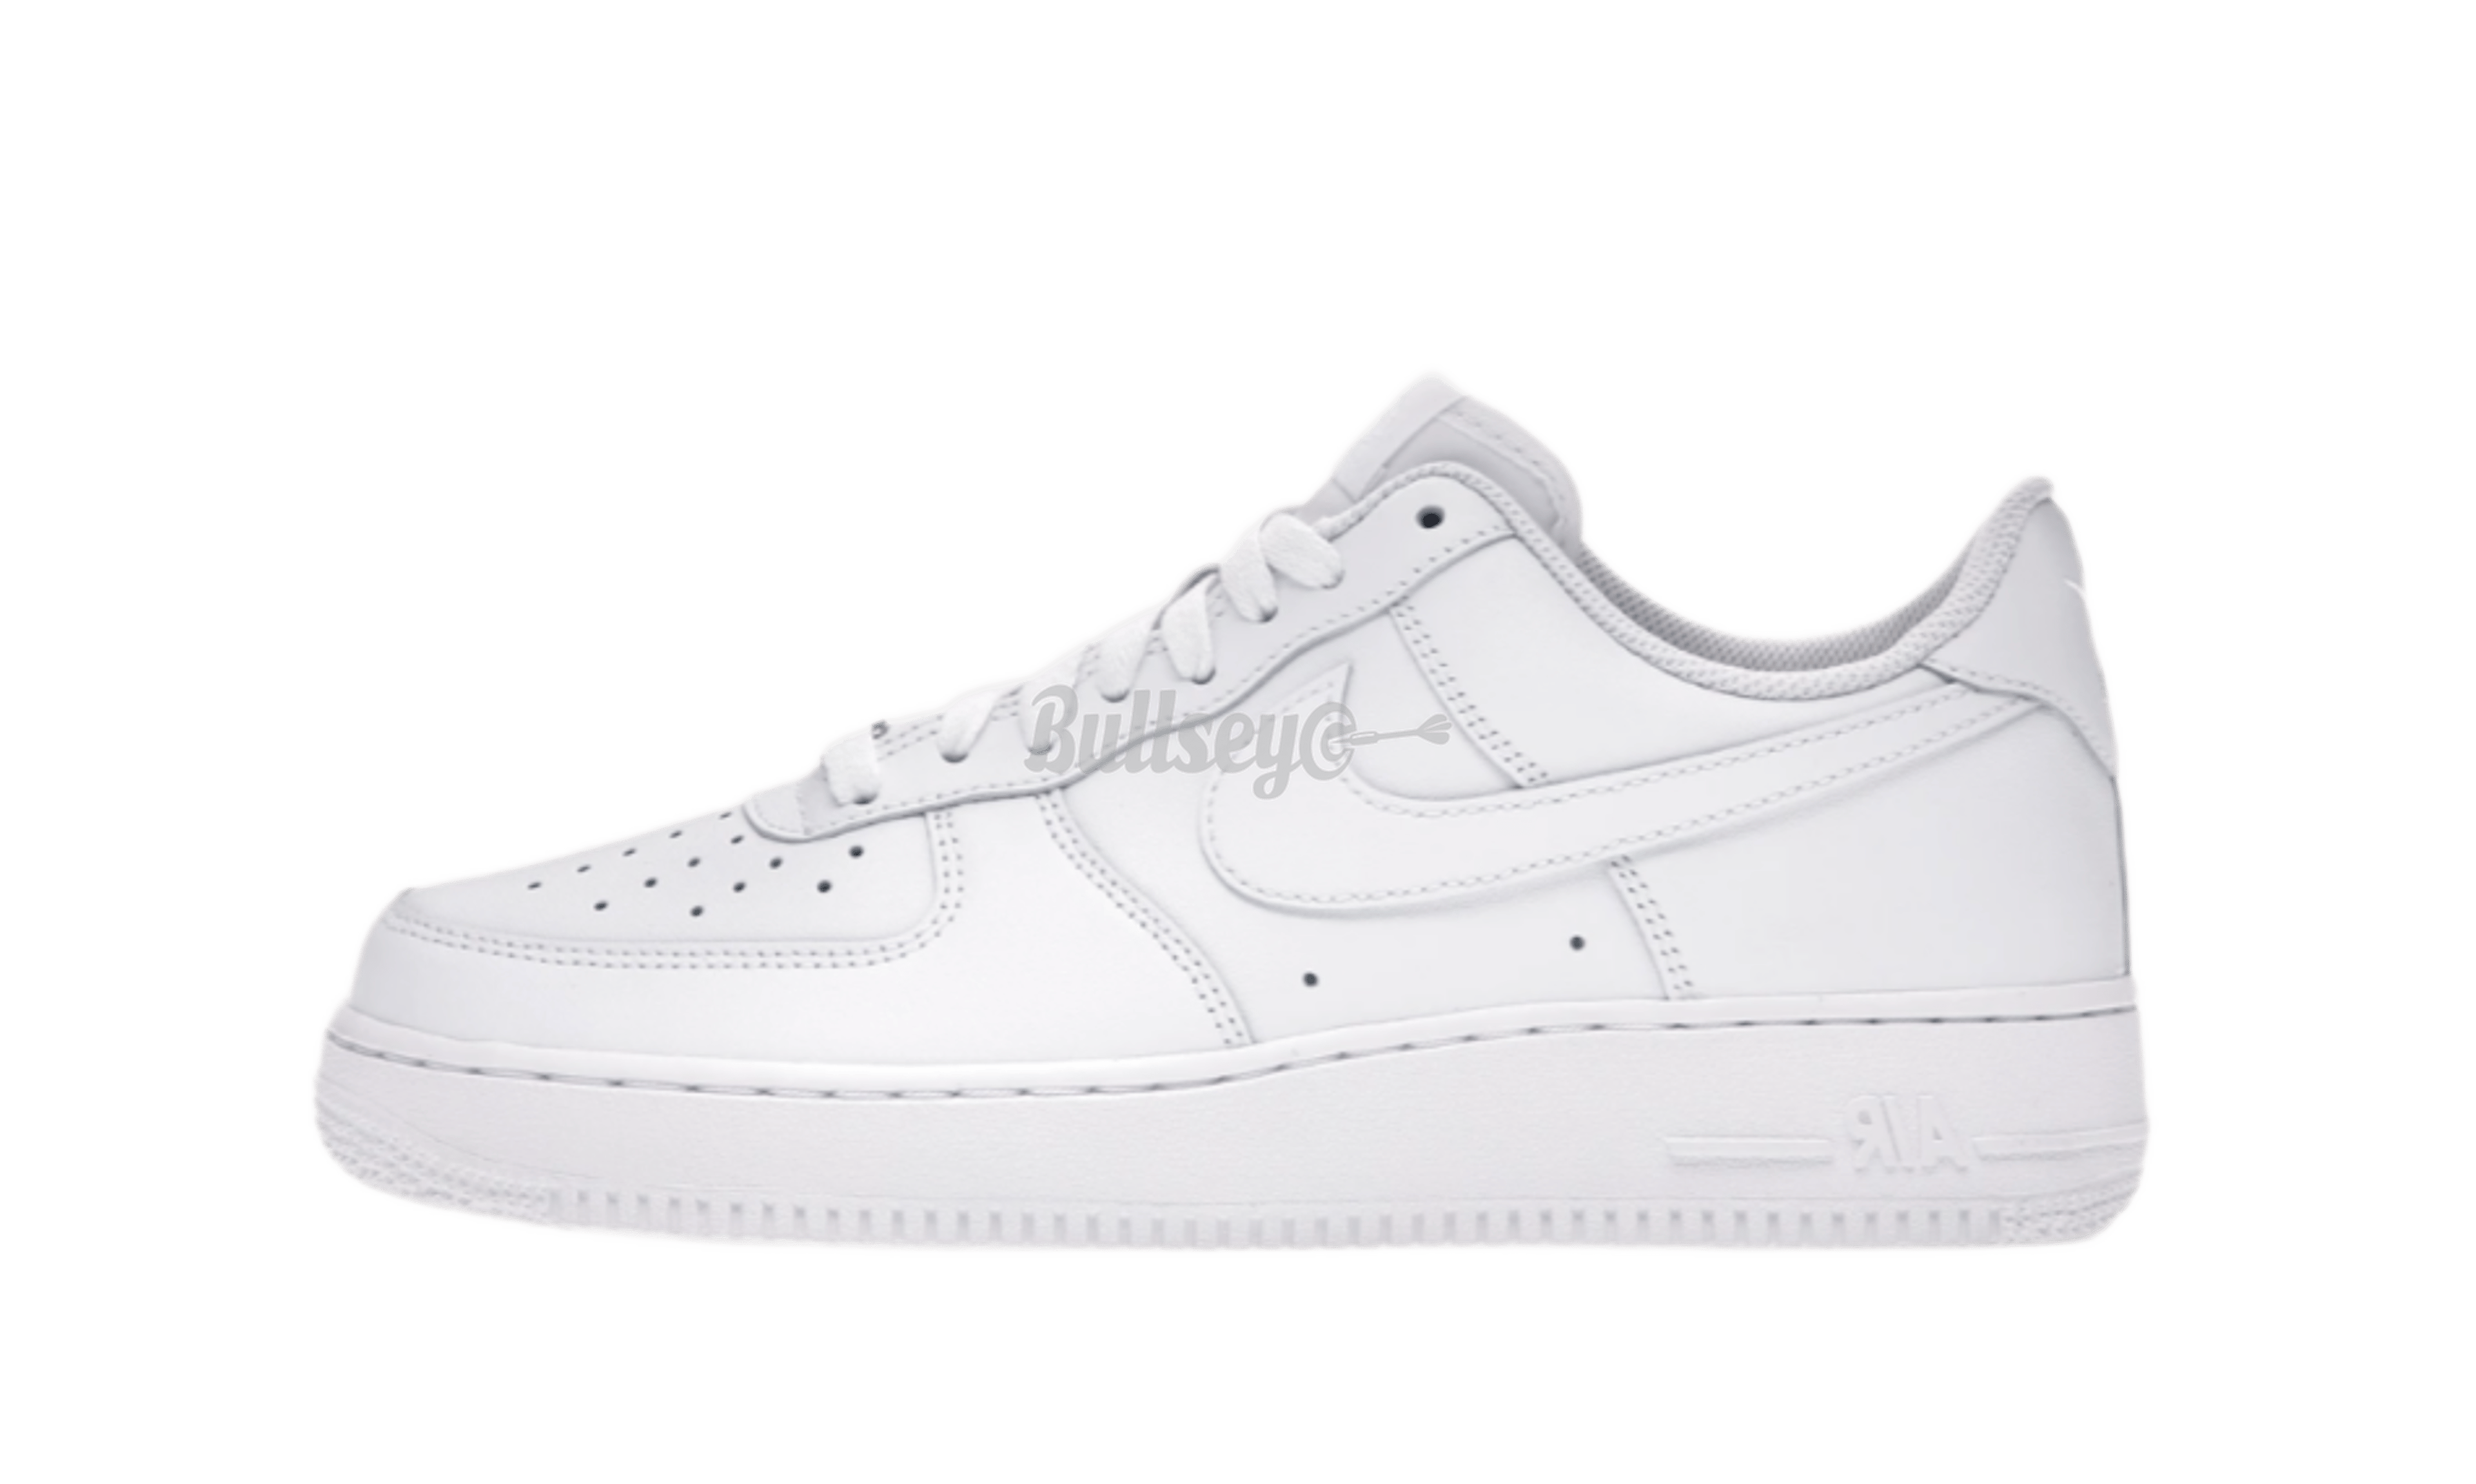 Nike Air Force 1 Low "White"